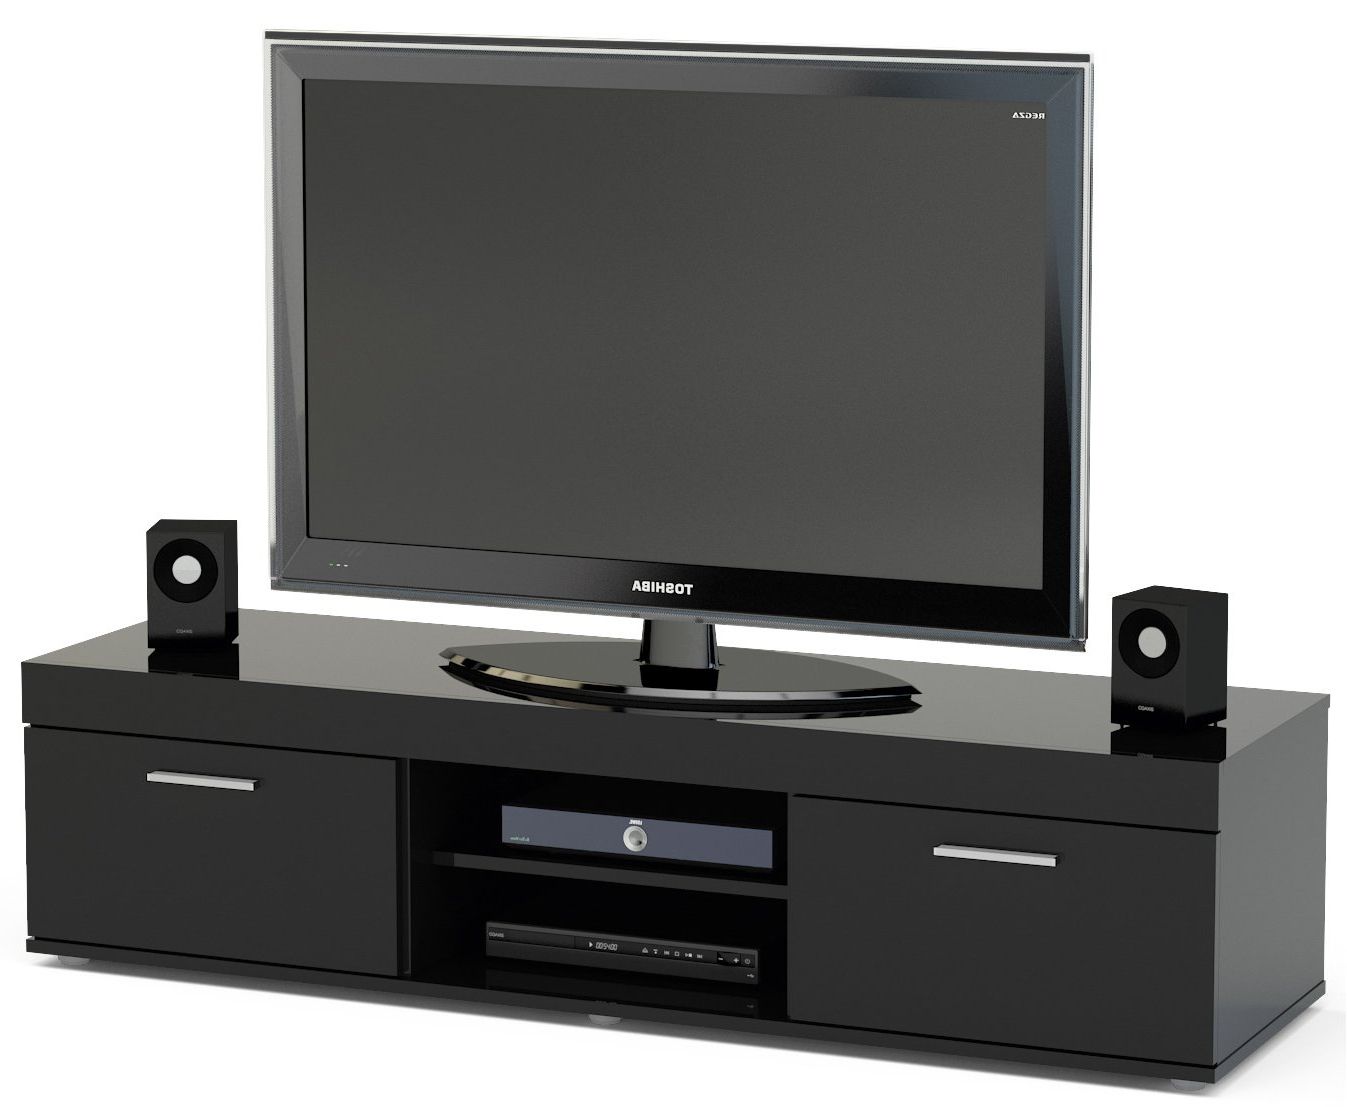 Tnw Carnaby Black Tv Stand Unit For Tvs Up To 65 Inch For Fashionable Dallas Tv Stands For Tvs Up To 65" (View 14 of 20)